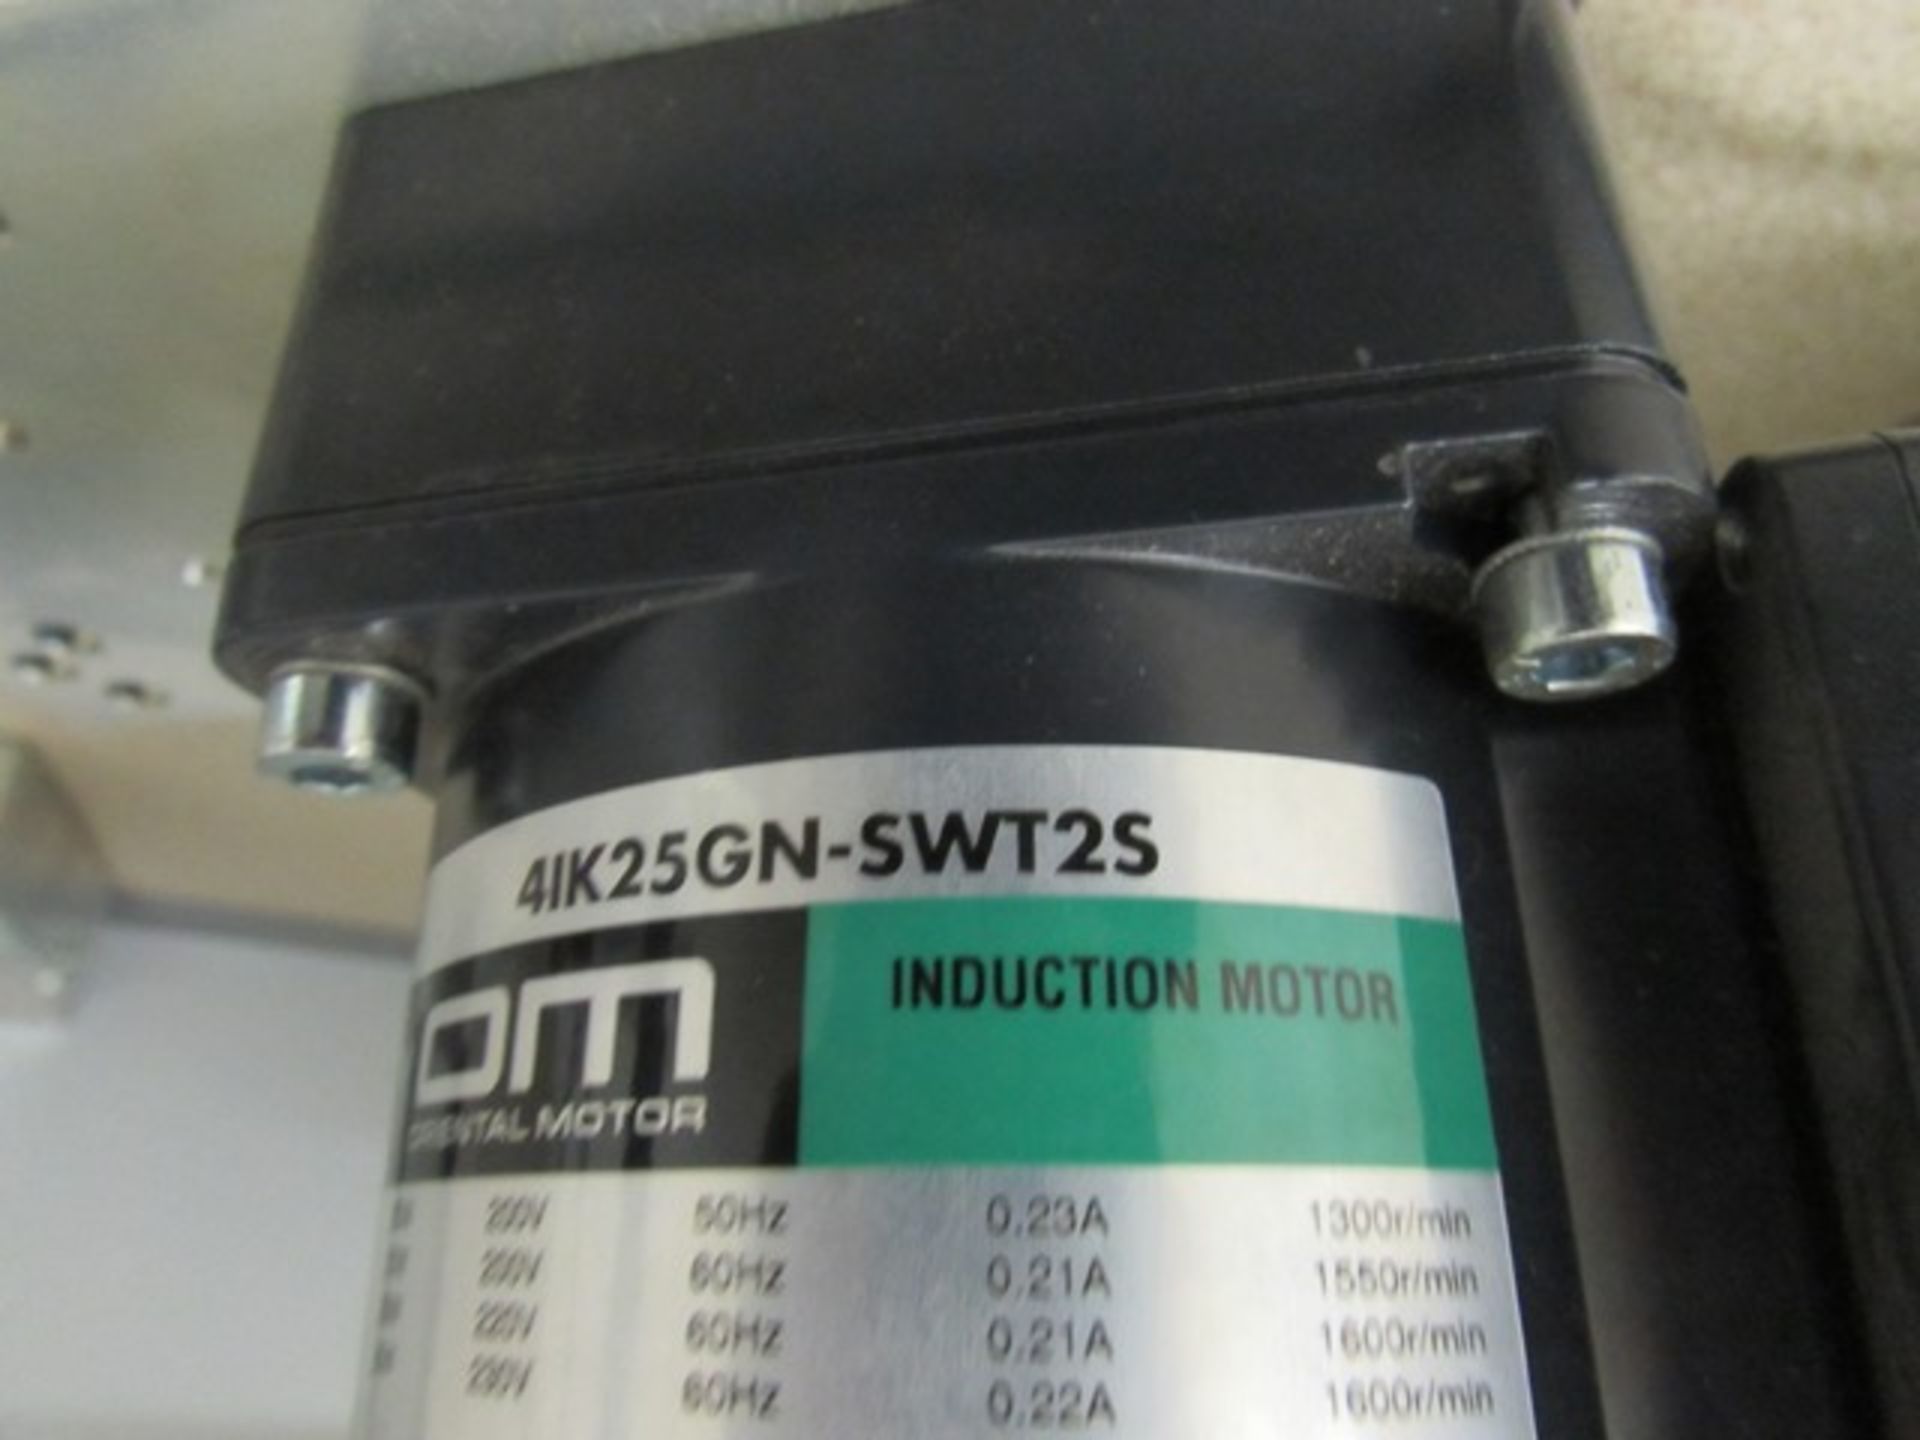 Oriental Motors 41K25GN-SWT25 induction motor c/w 25W (1/30Hp) output power, - Image 2 of 2